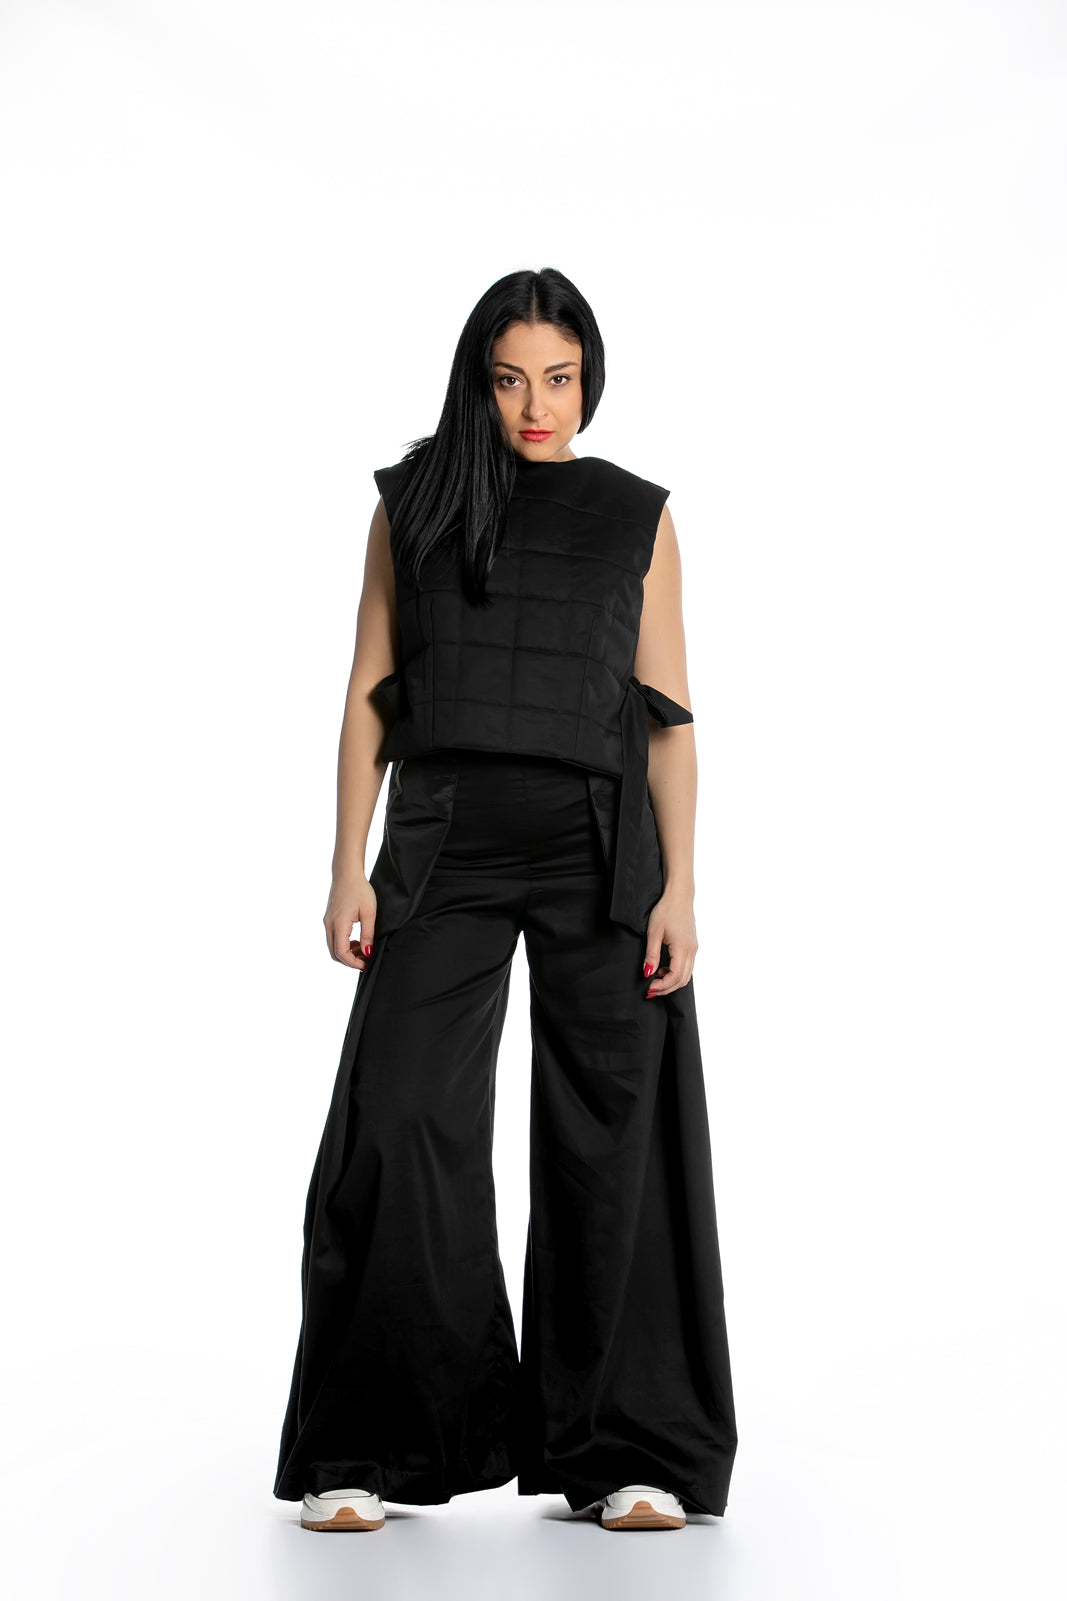 Black Deconstructed Top with Side Ribbons